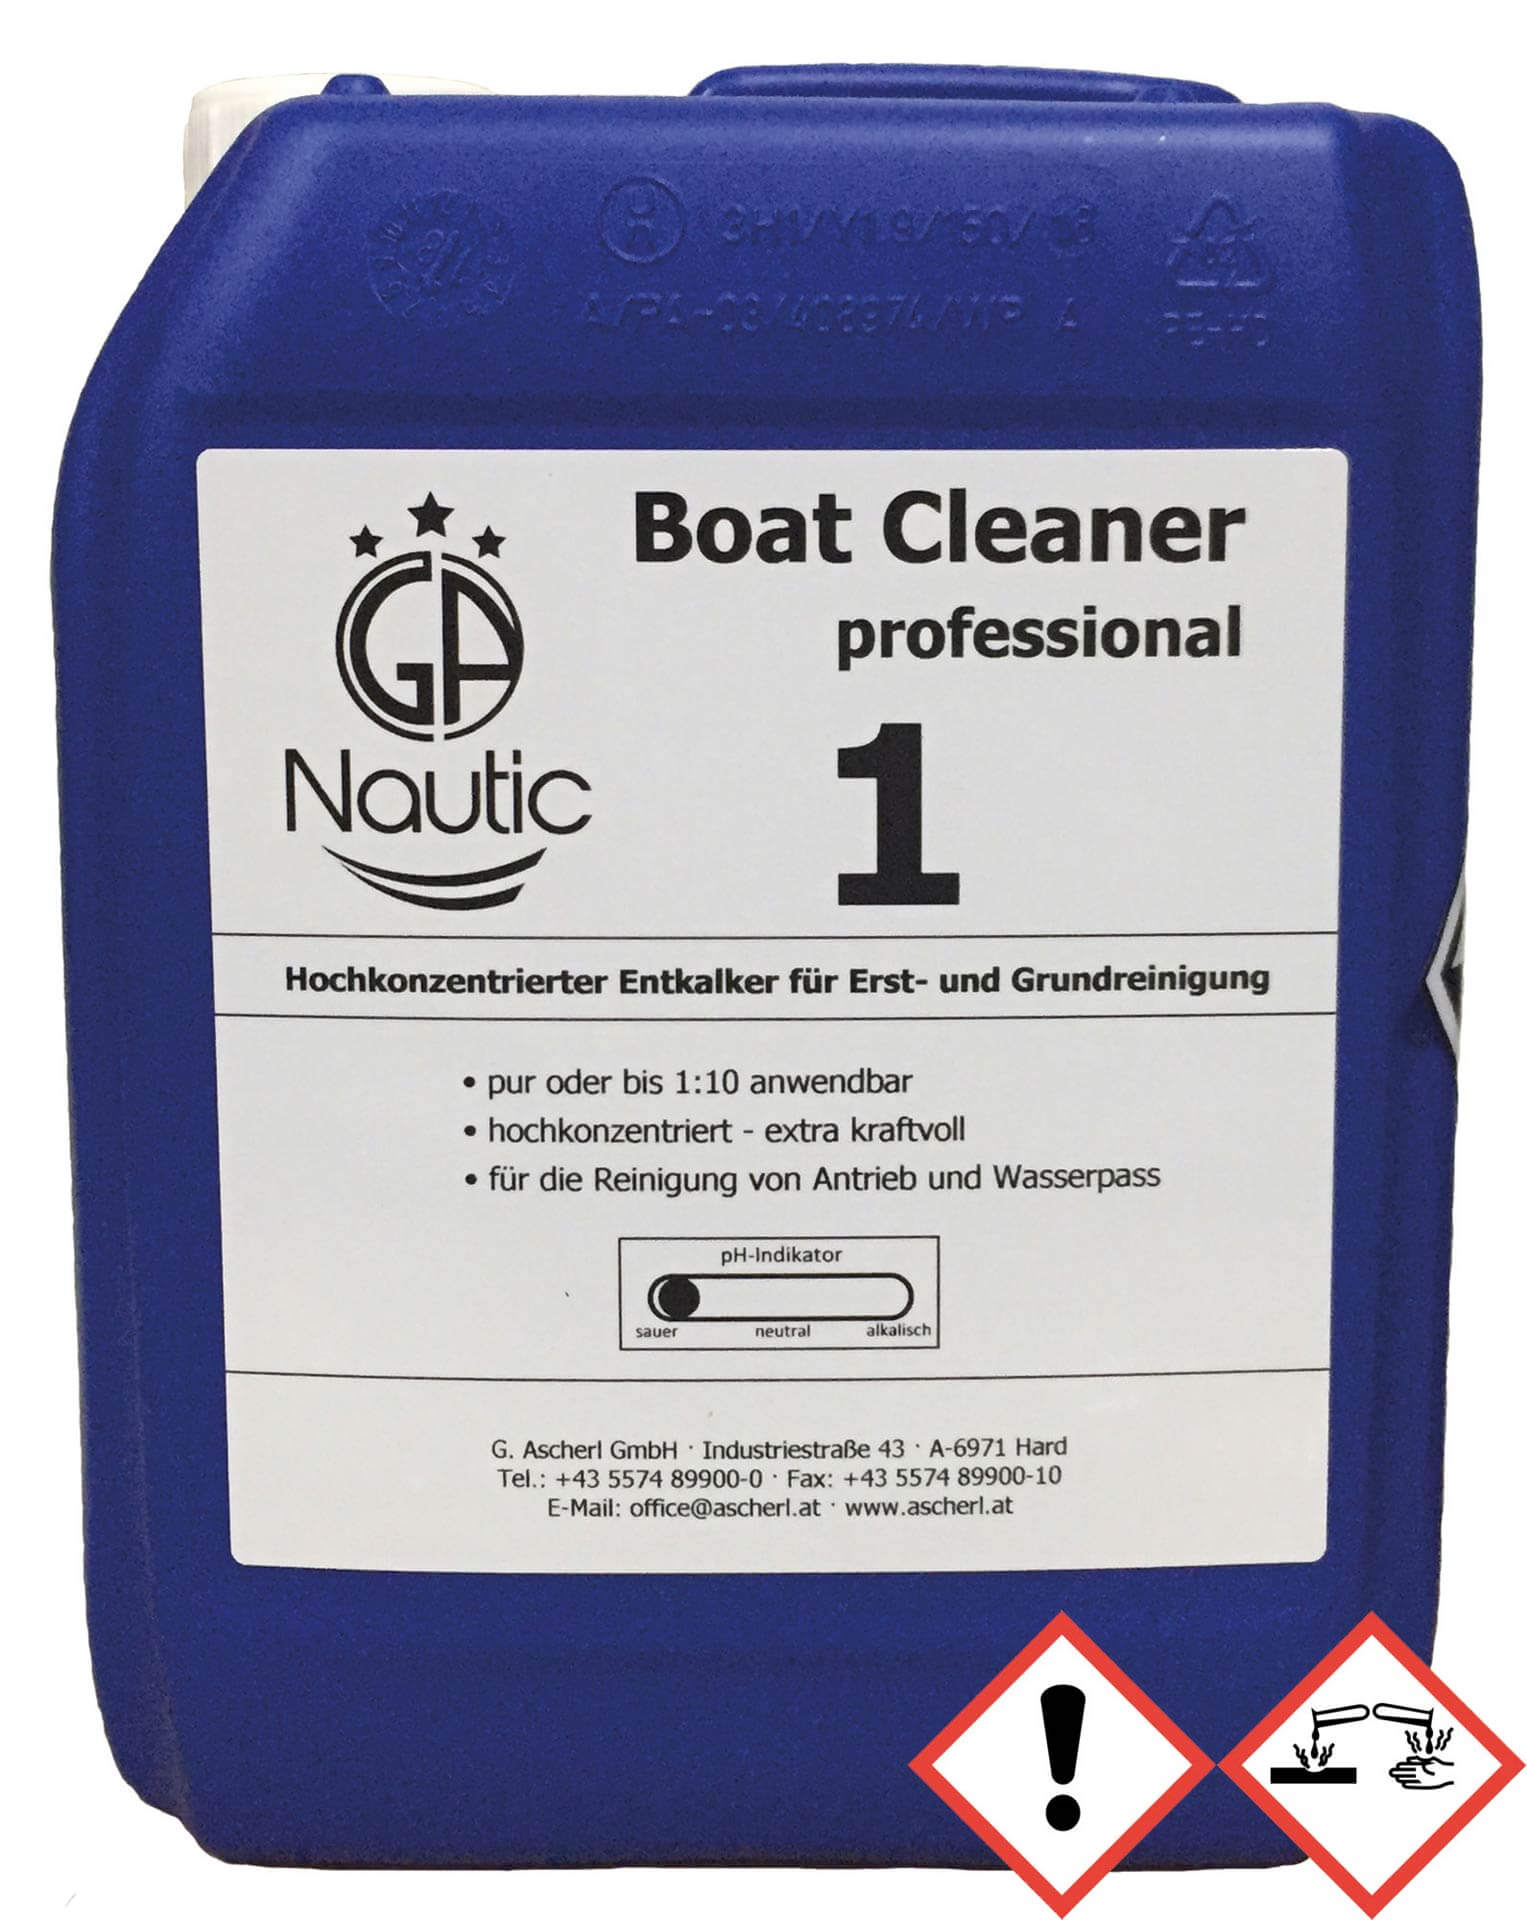 Boat Cleaner 1 professional